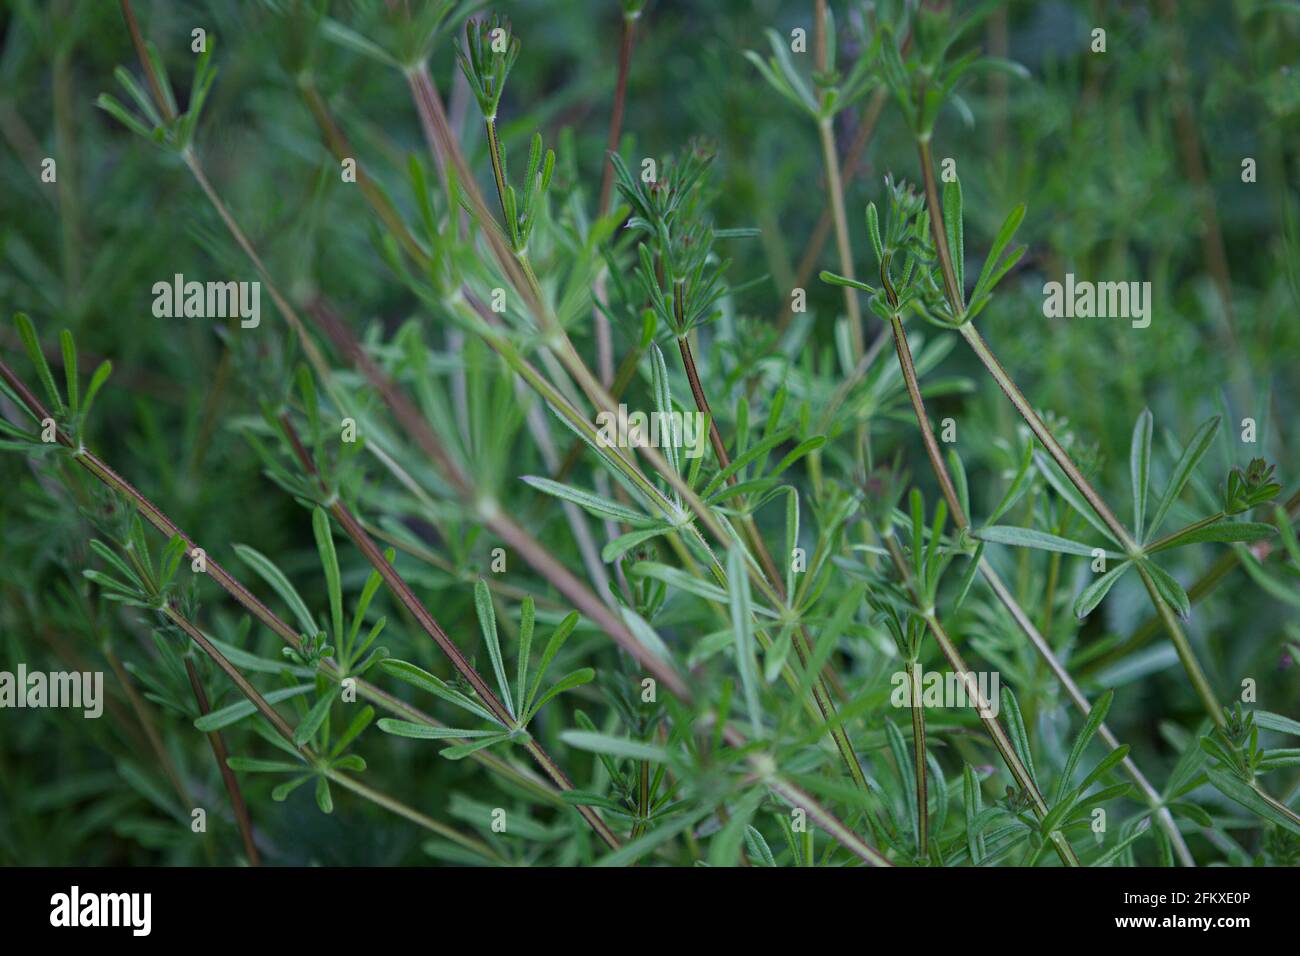 Galium aparine, cleavers, bedstraw, goosegrass, catchweed, stickweed, hitchhikers, sticky bob, stickyback, robin-run-the-hedge, sticky willy Stock Photo